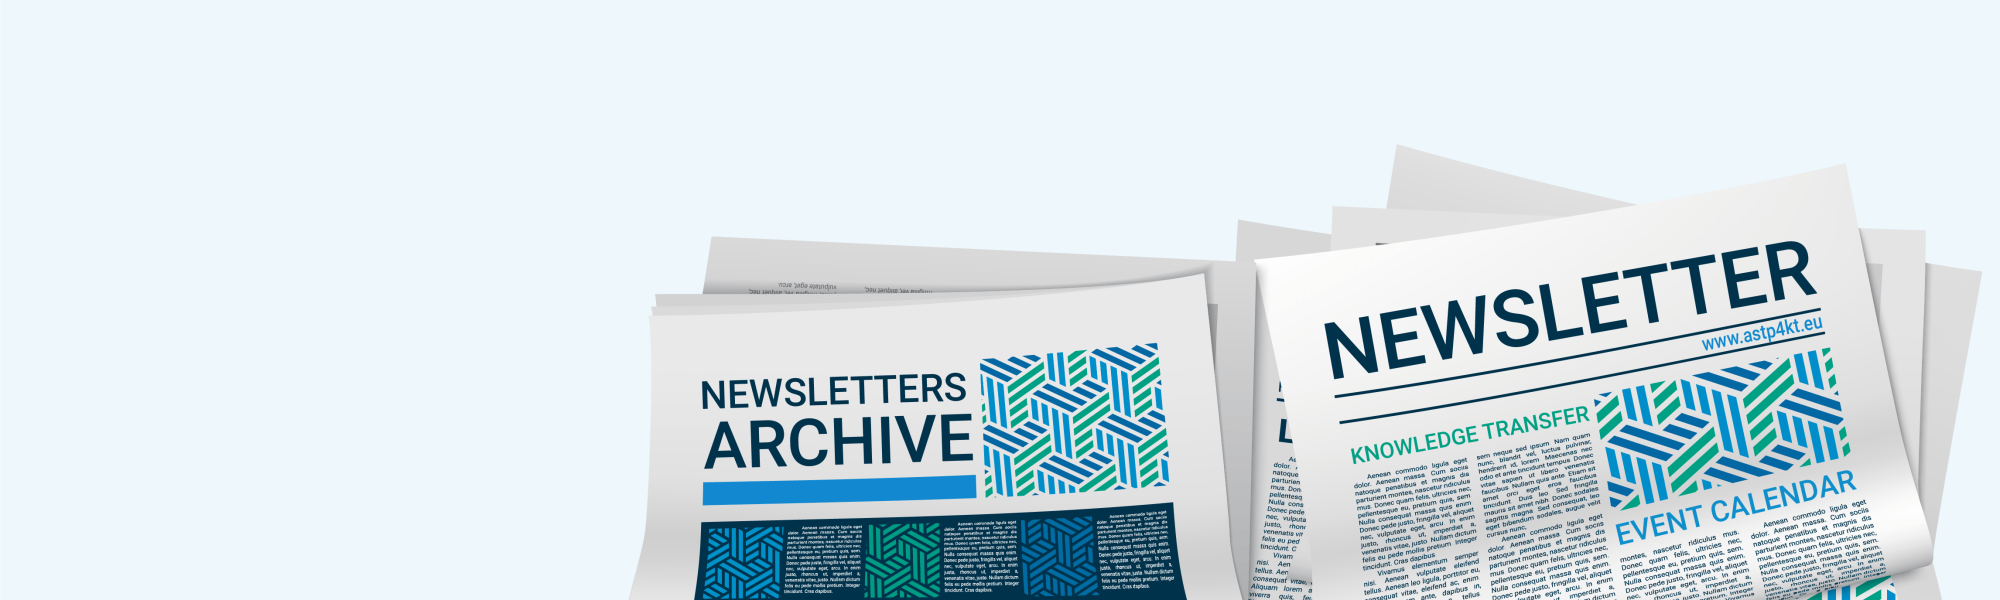 ASTP - Newsletters Archive